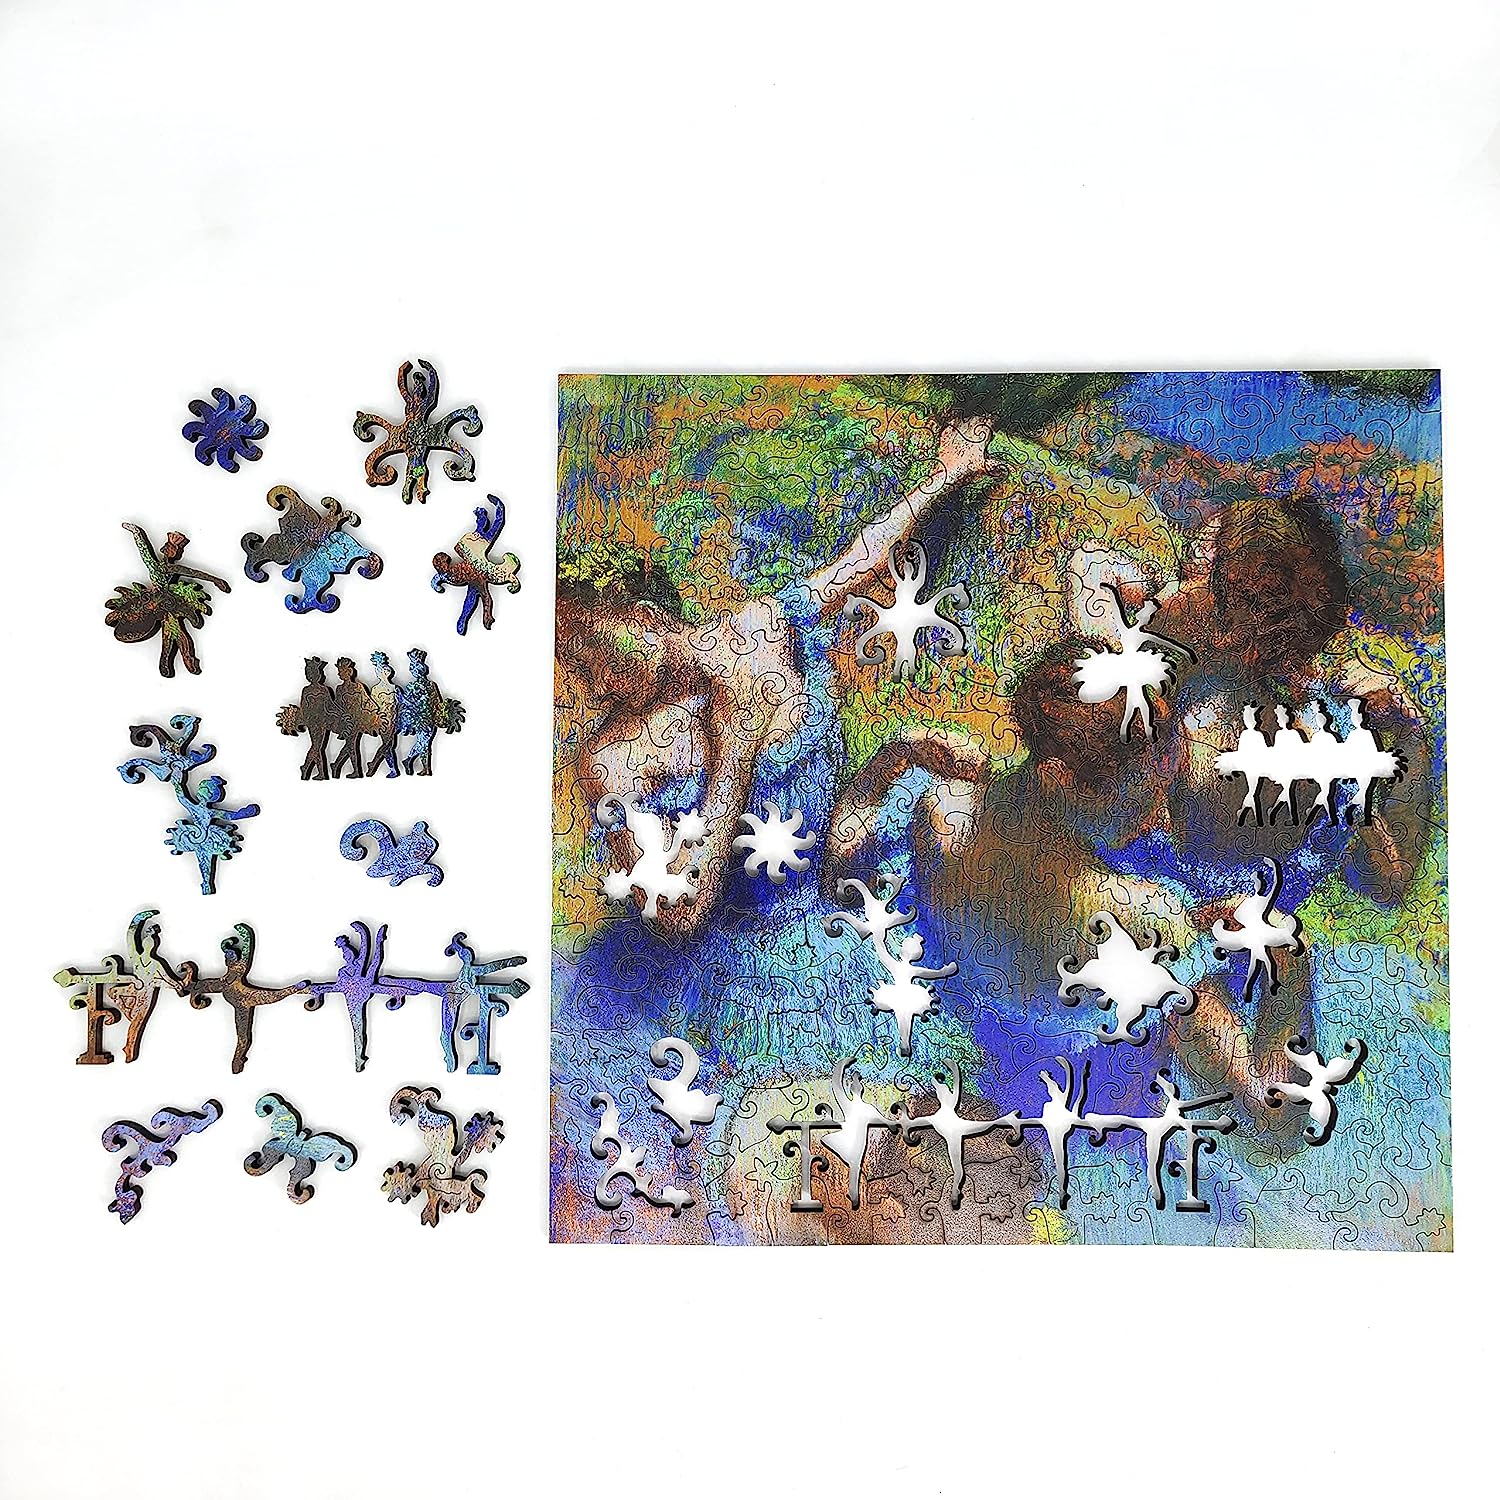 Wooden Puzzle for Adults - Uniquely Shaped Pieces - Made in The USA by - 200 Pieces - Blue Dancers